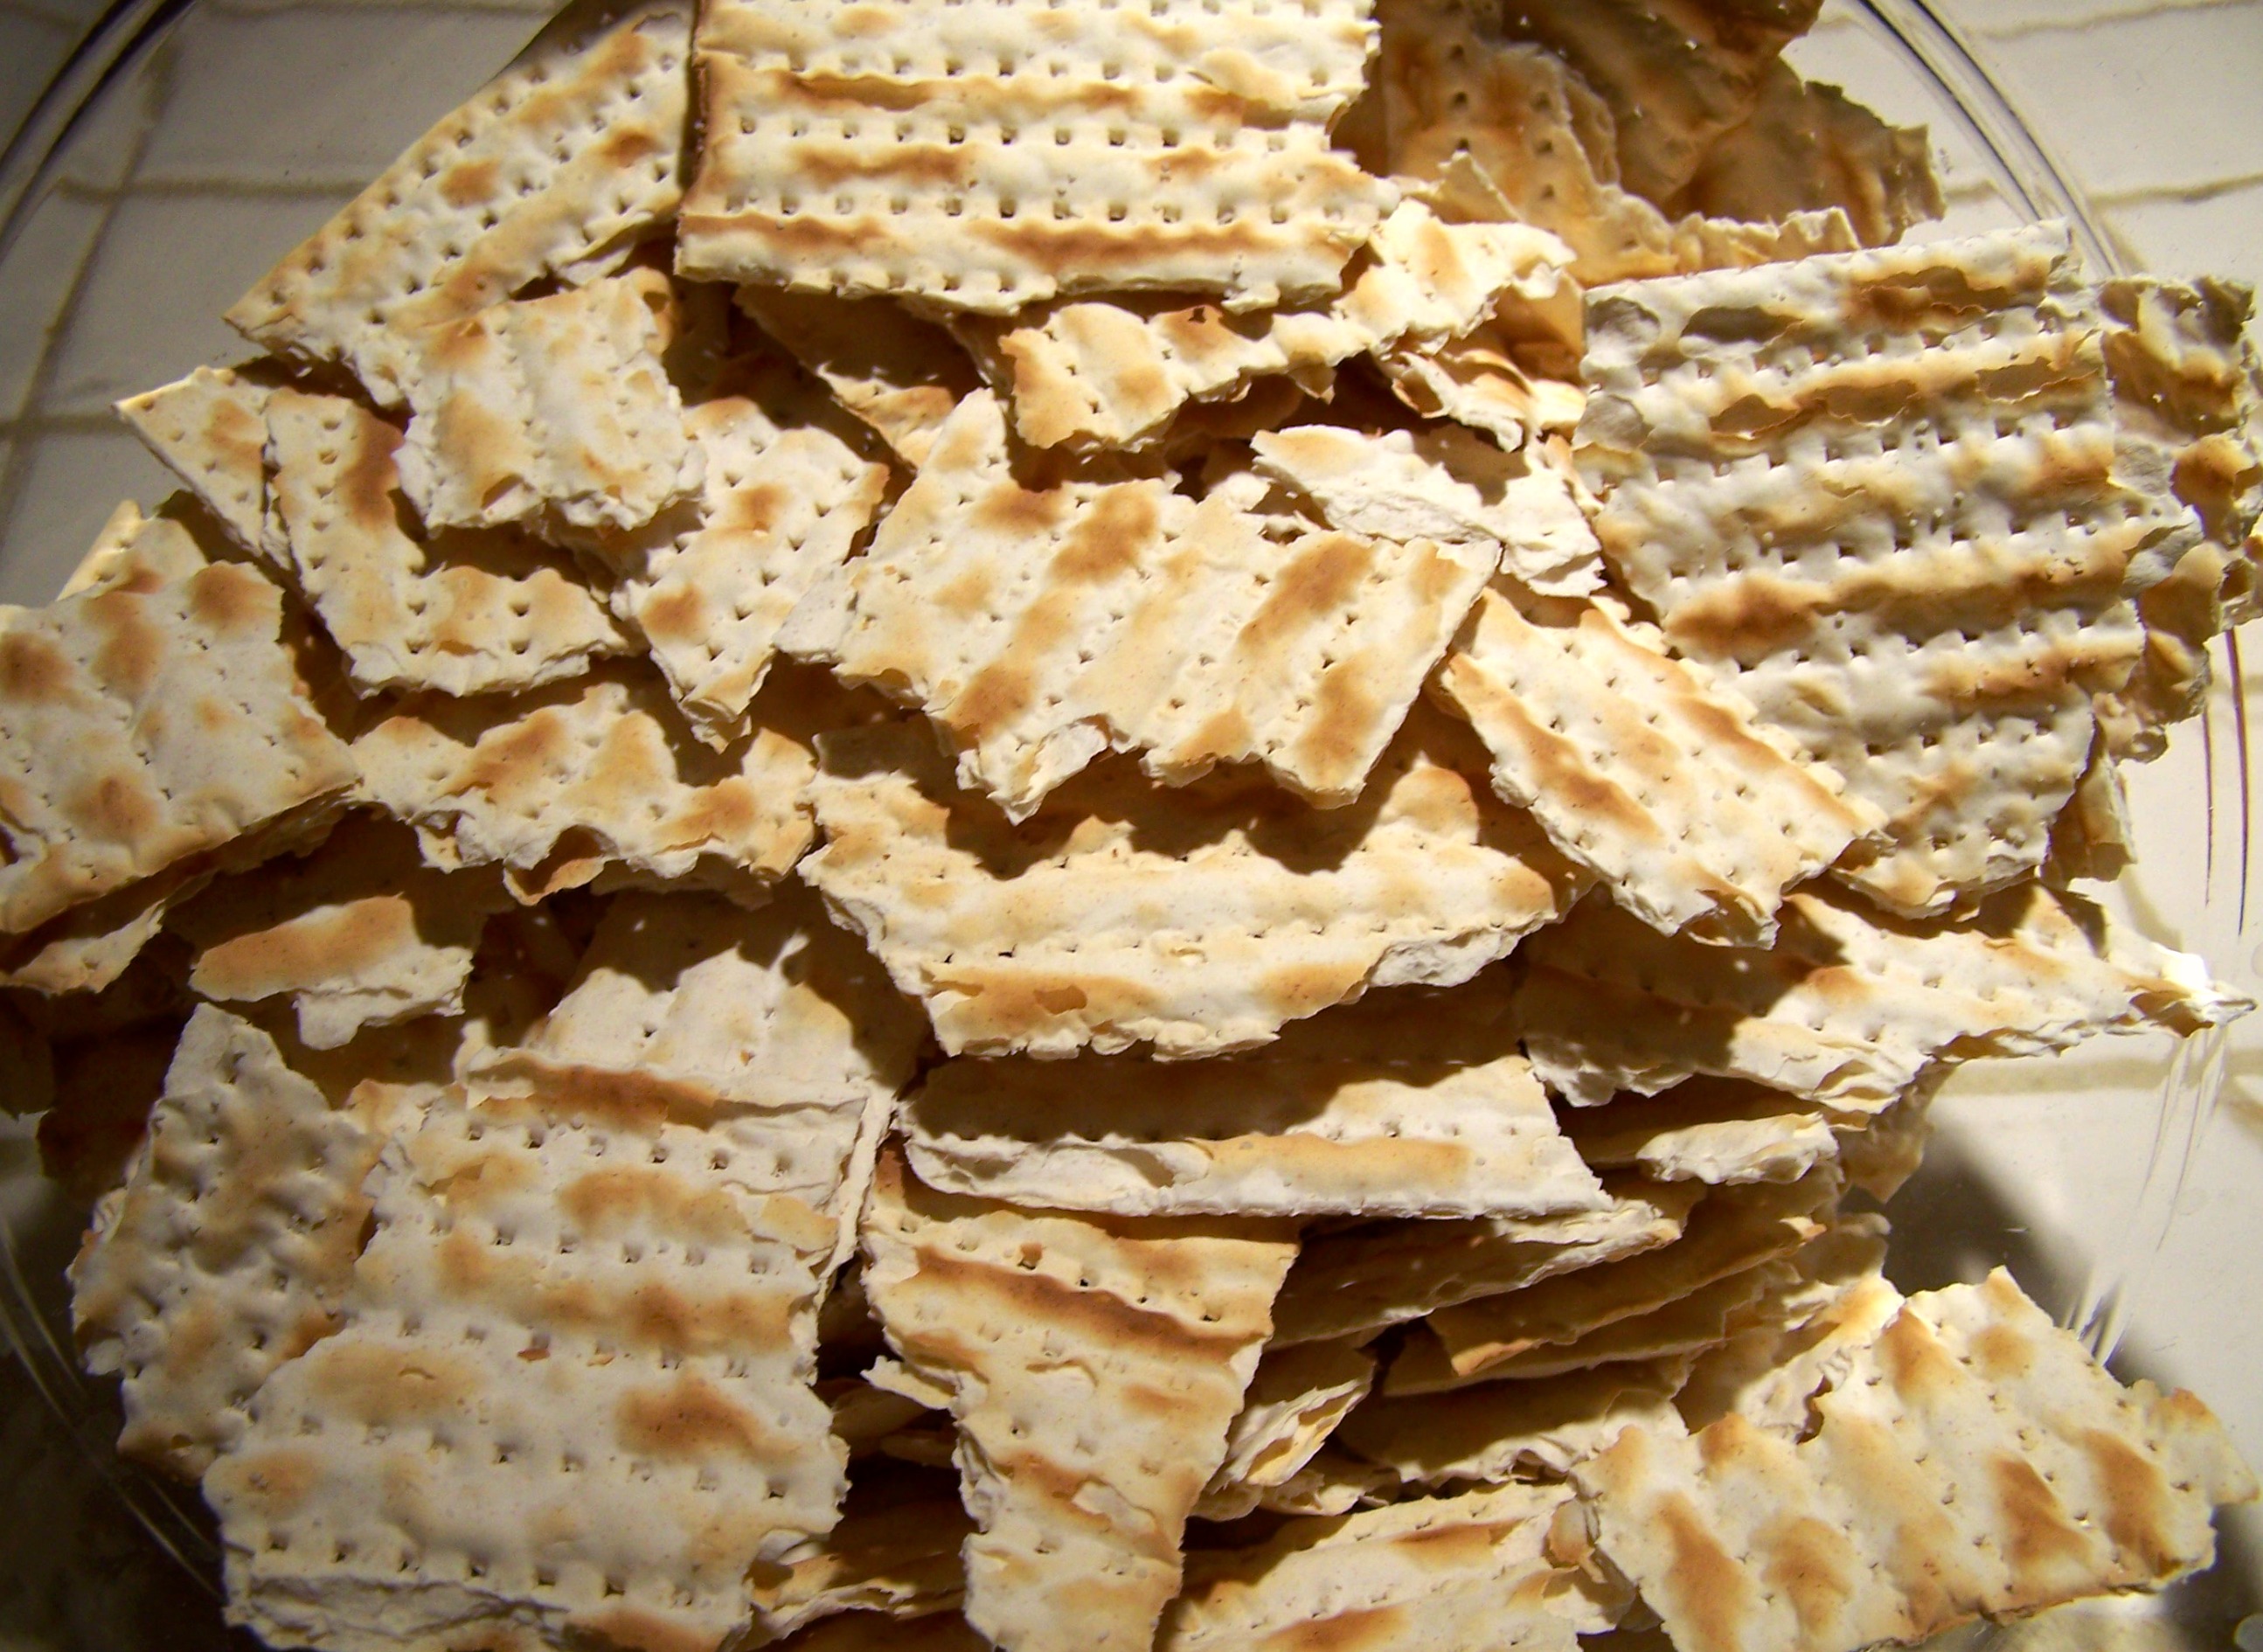 Since the Exodus from Egypt the people of Israel have been developing creative ways to eat matzah, but all of them involve breaking the unleavened bread.  (Photo from "Matzo Stuffing: A Jewish Twist on Thanksgiving", LeahsThoughts.com)